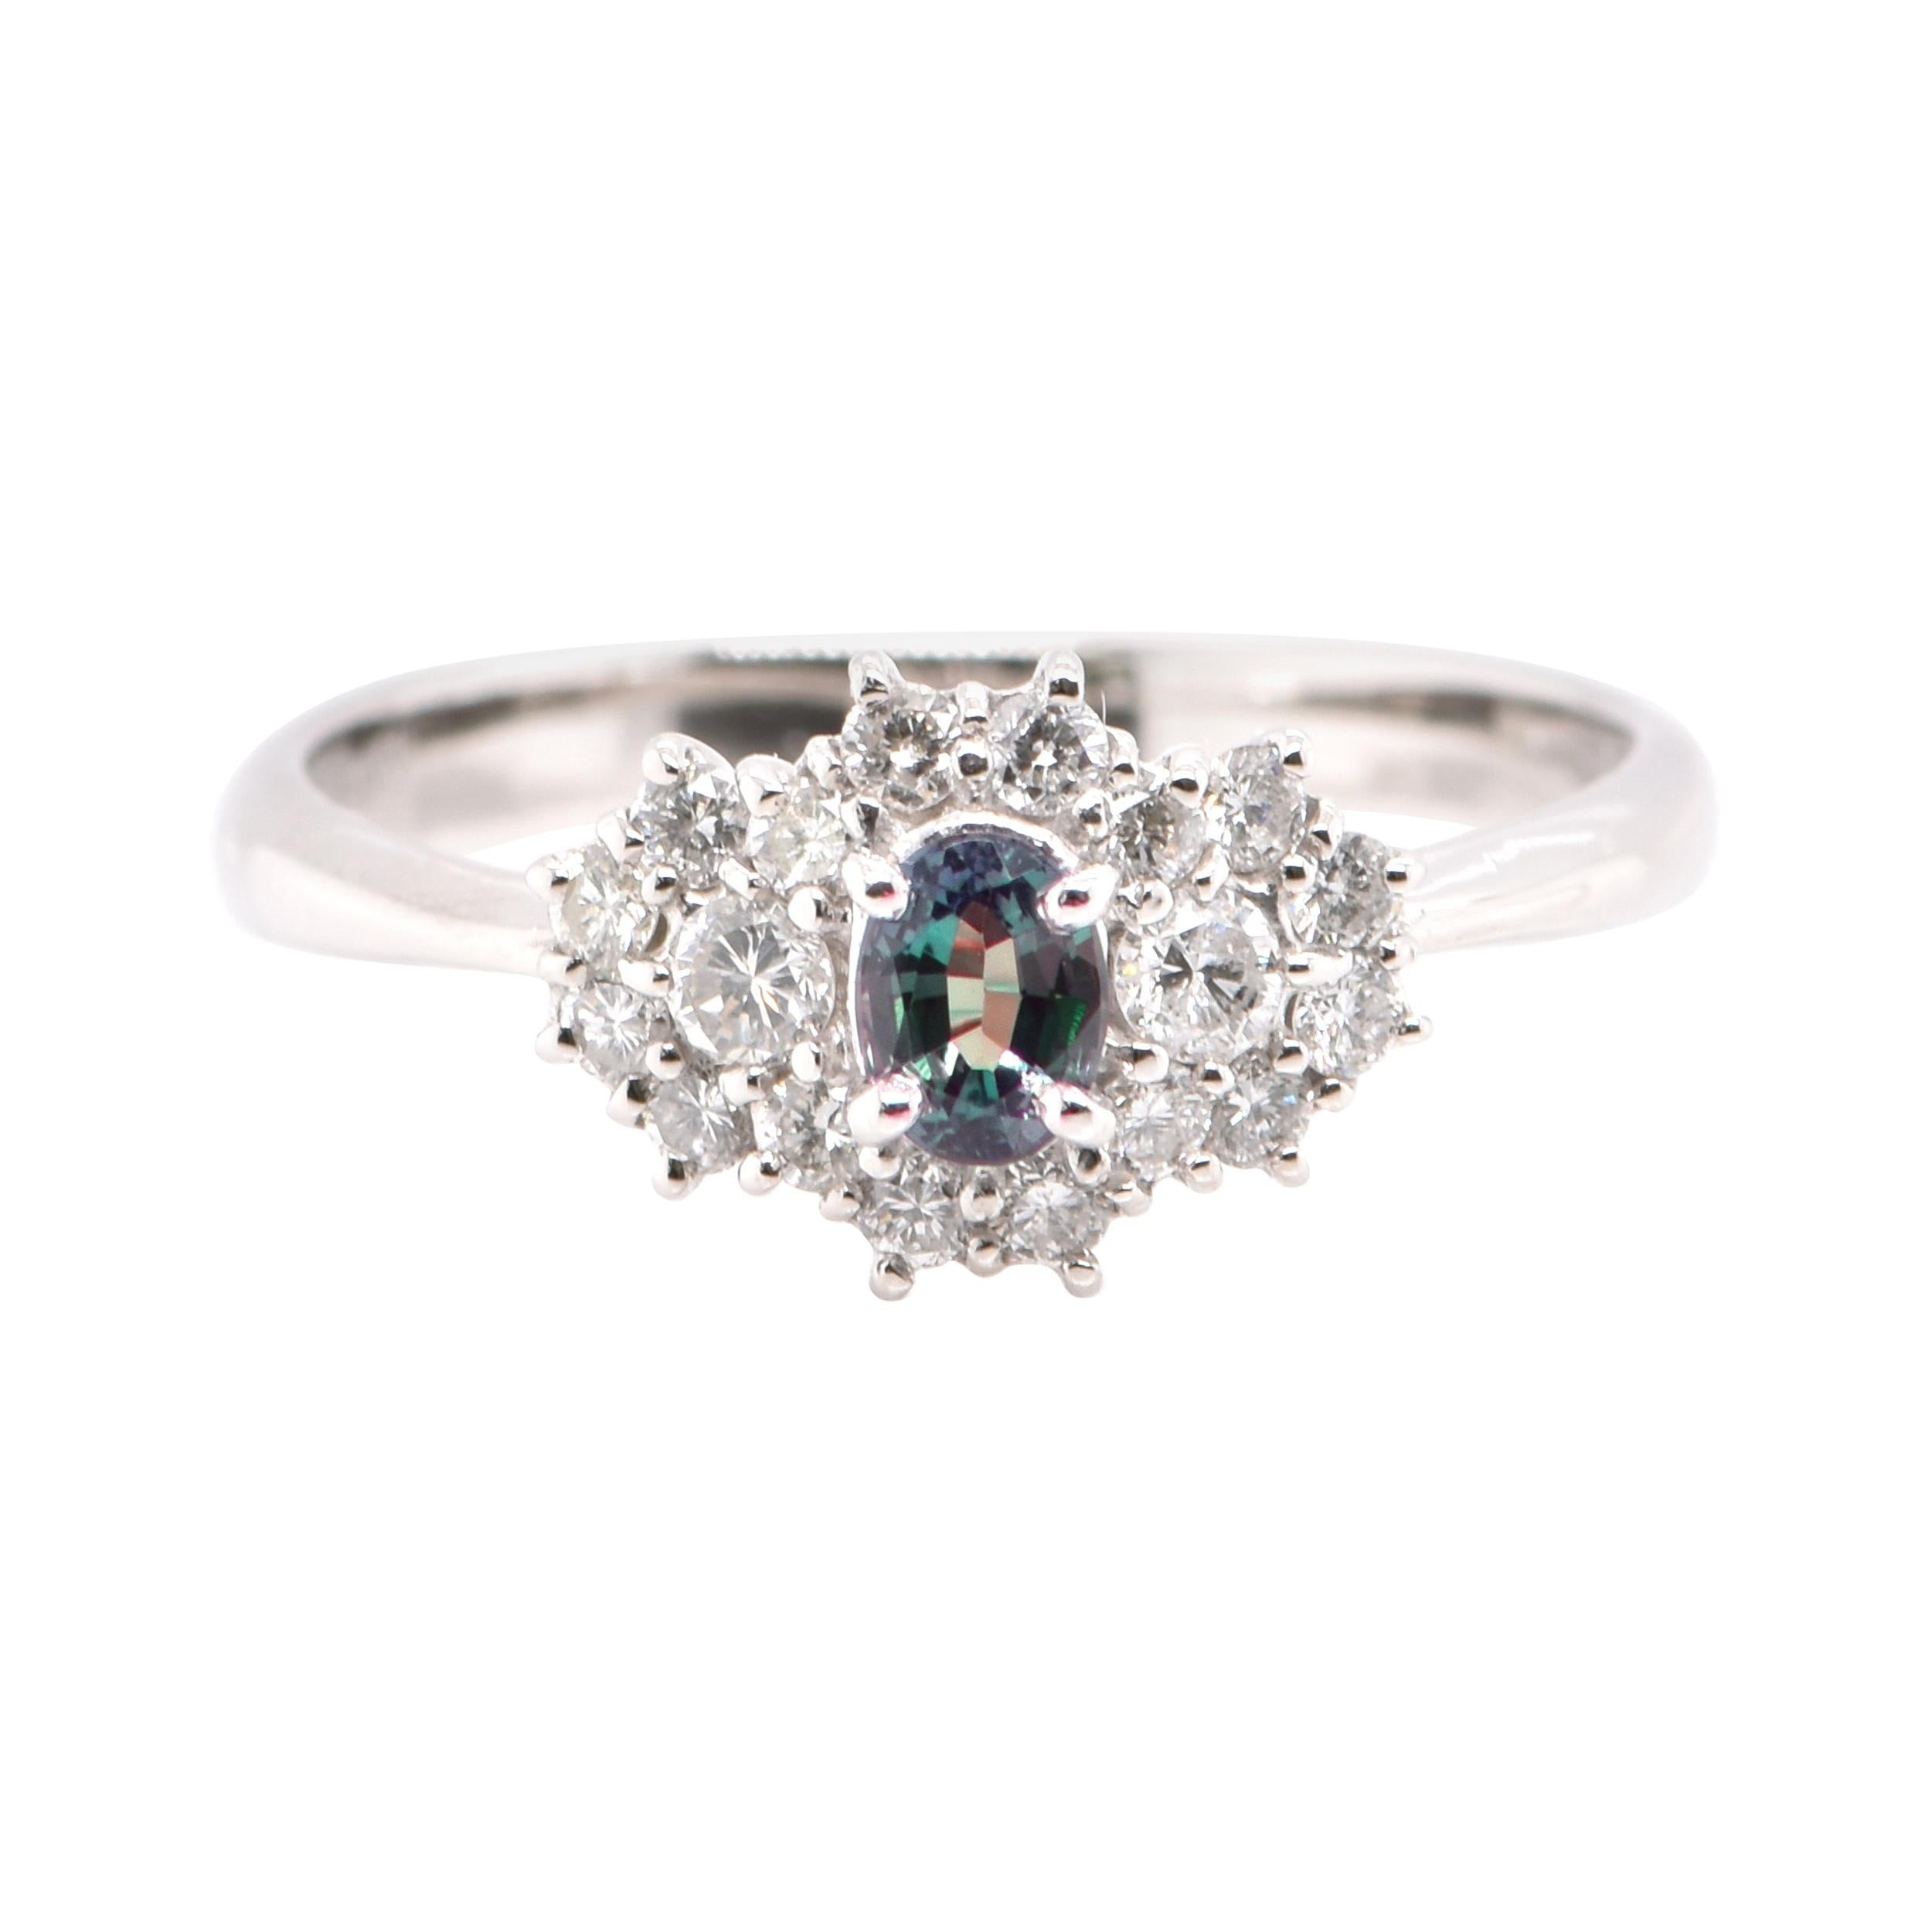 0.25 Carat, Natural Color-Changing Alexandrite and Diamond Ring Set in Platinum